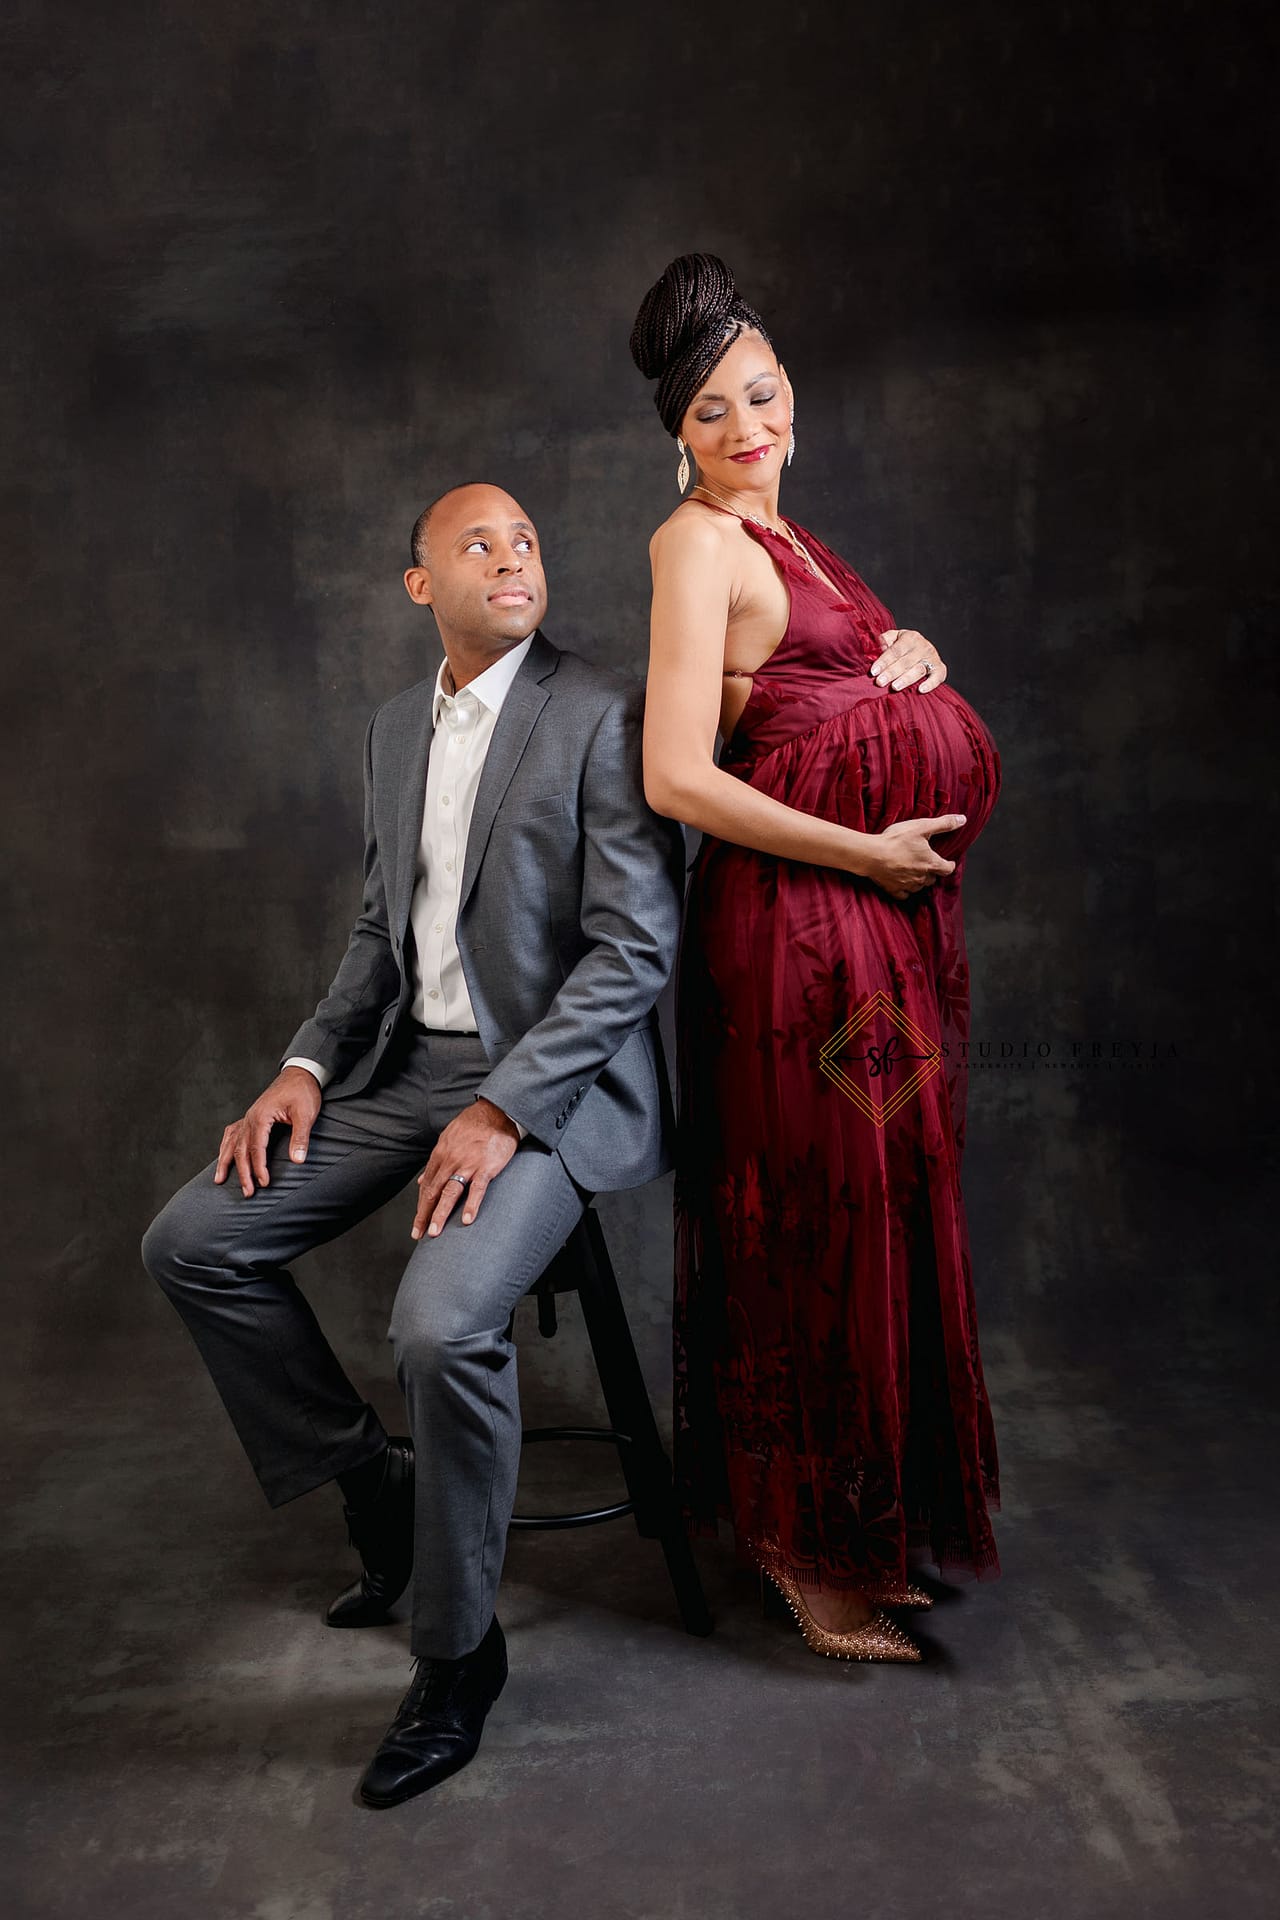 Mom and dad looking at each other during maternity photos in studio